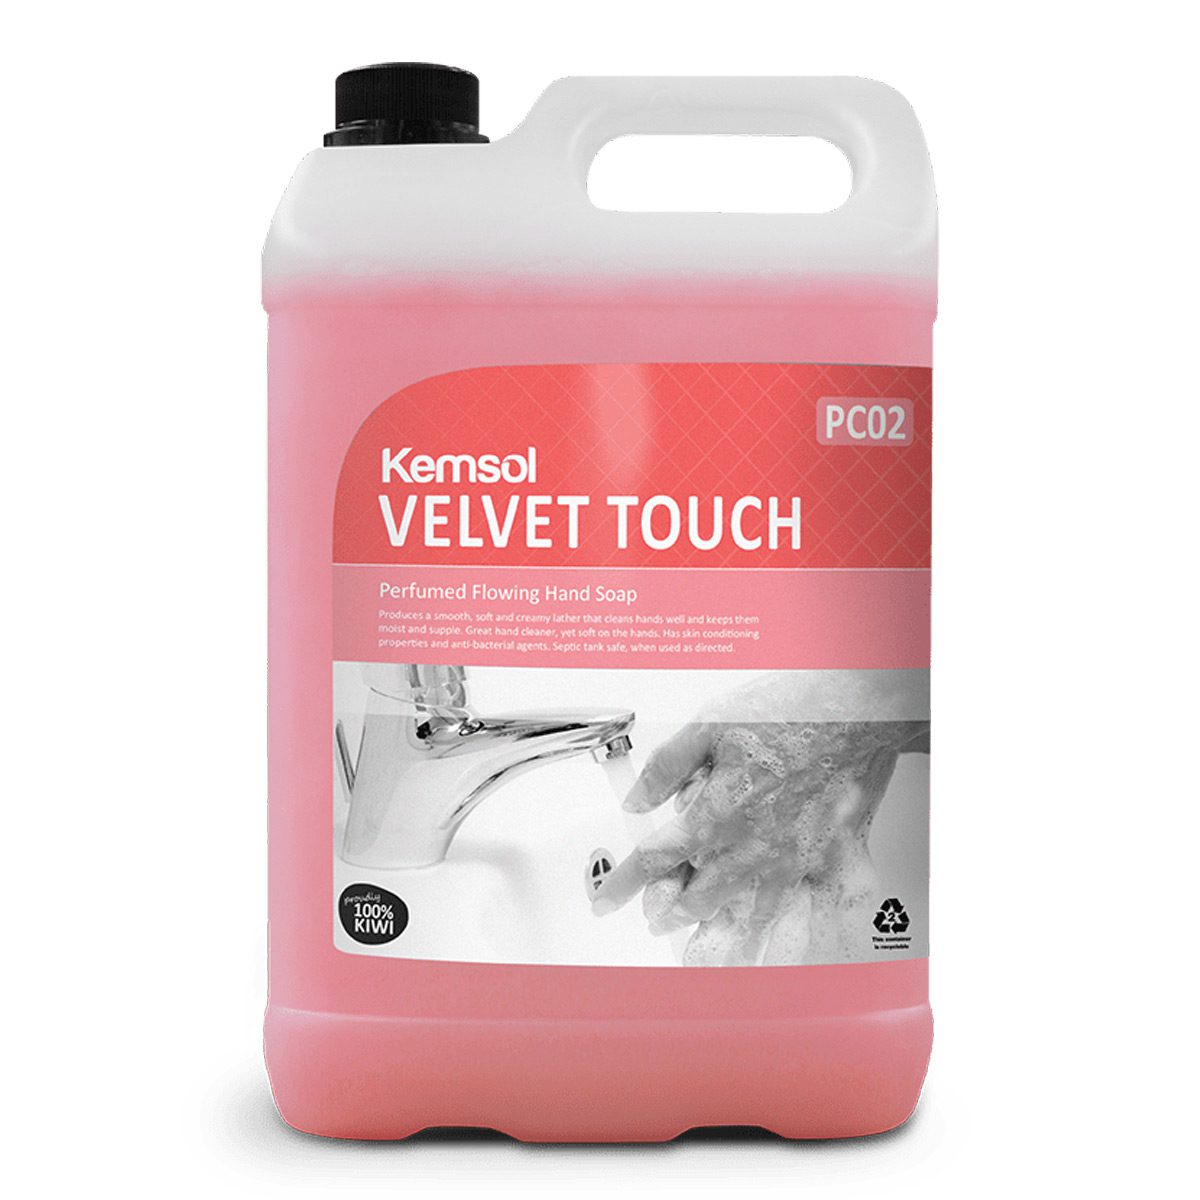 washroom-skincare-hand-soap-kemsol-velvet-touch-hand-soap-smooth-soft-creamy-lather-great-hand-cleaner-soft-on-hands-skin-conditioning-properties-septic-tank-safe-vjs-distributors-KVTOUCHSKU